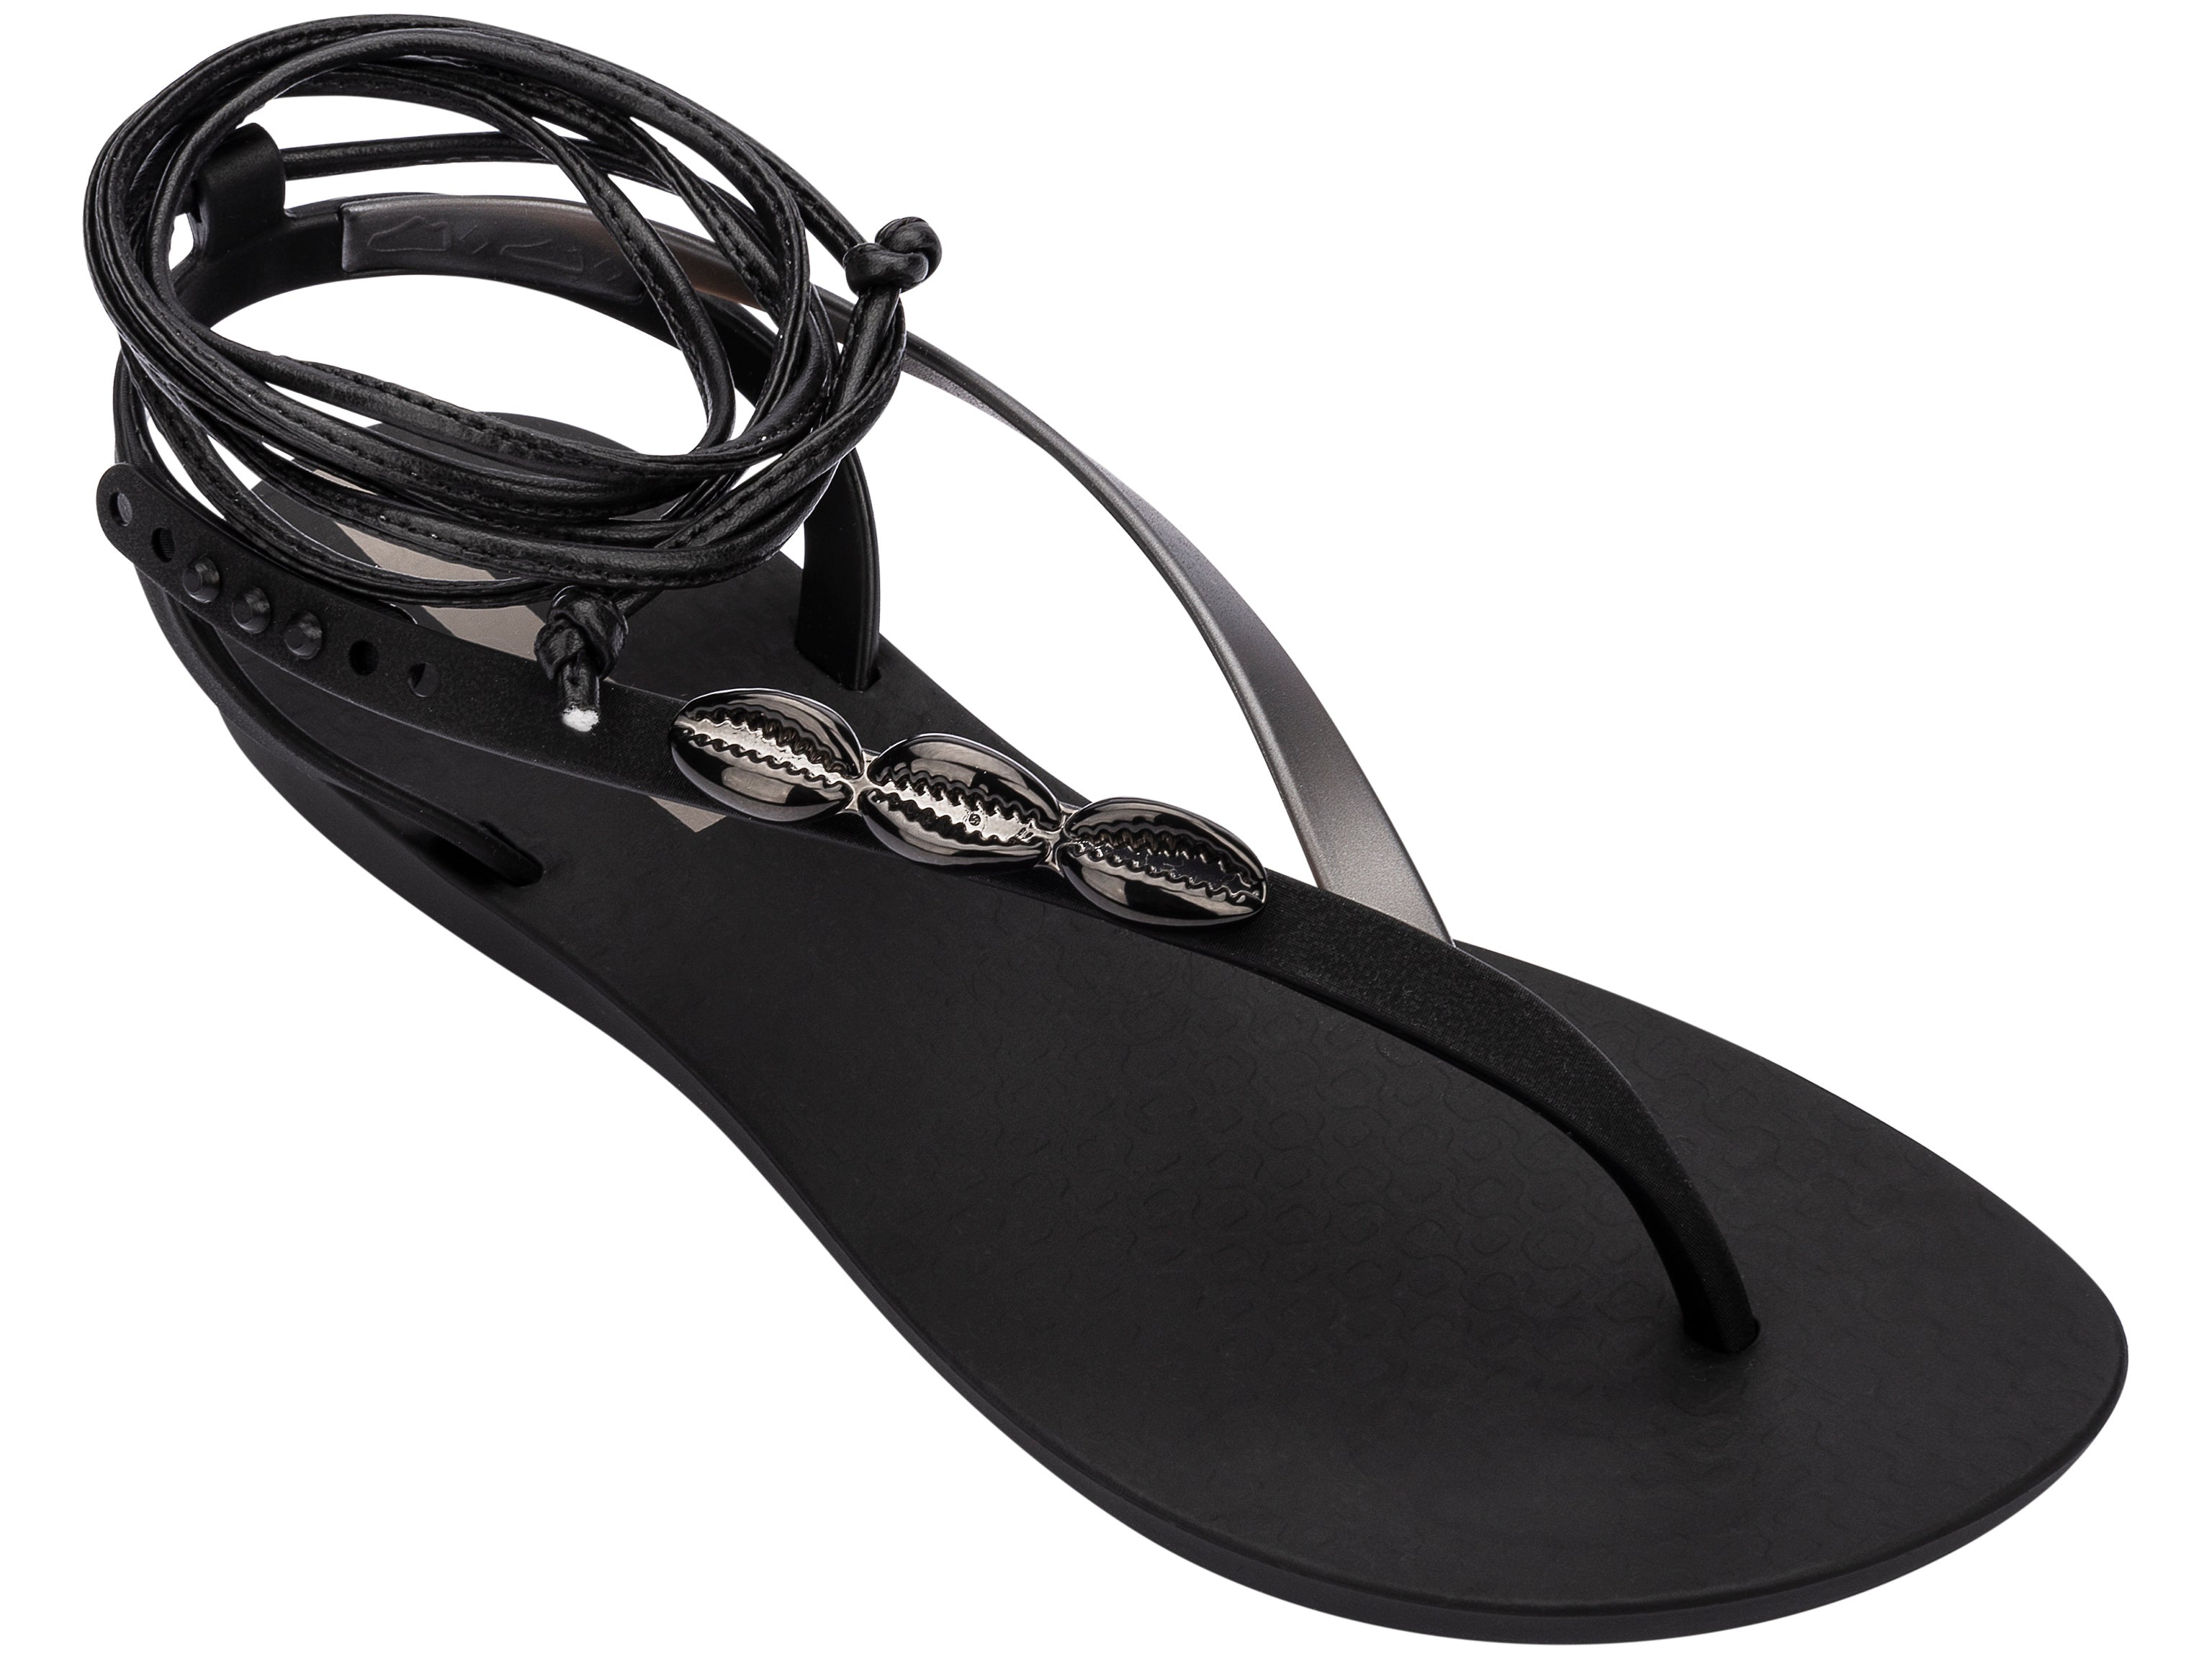 Angled view of a black Ipanema Salty Strappy women's sandal with ankle tie up and 3 silver shells on the strap.